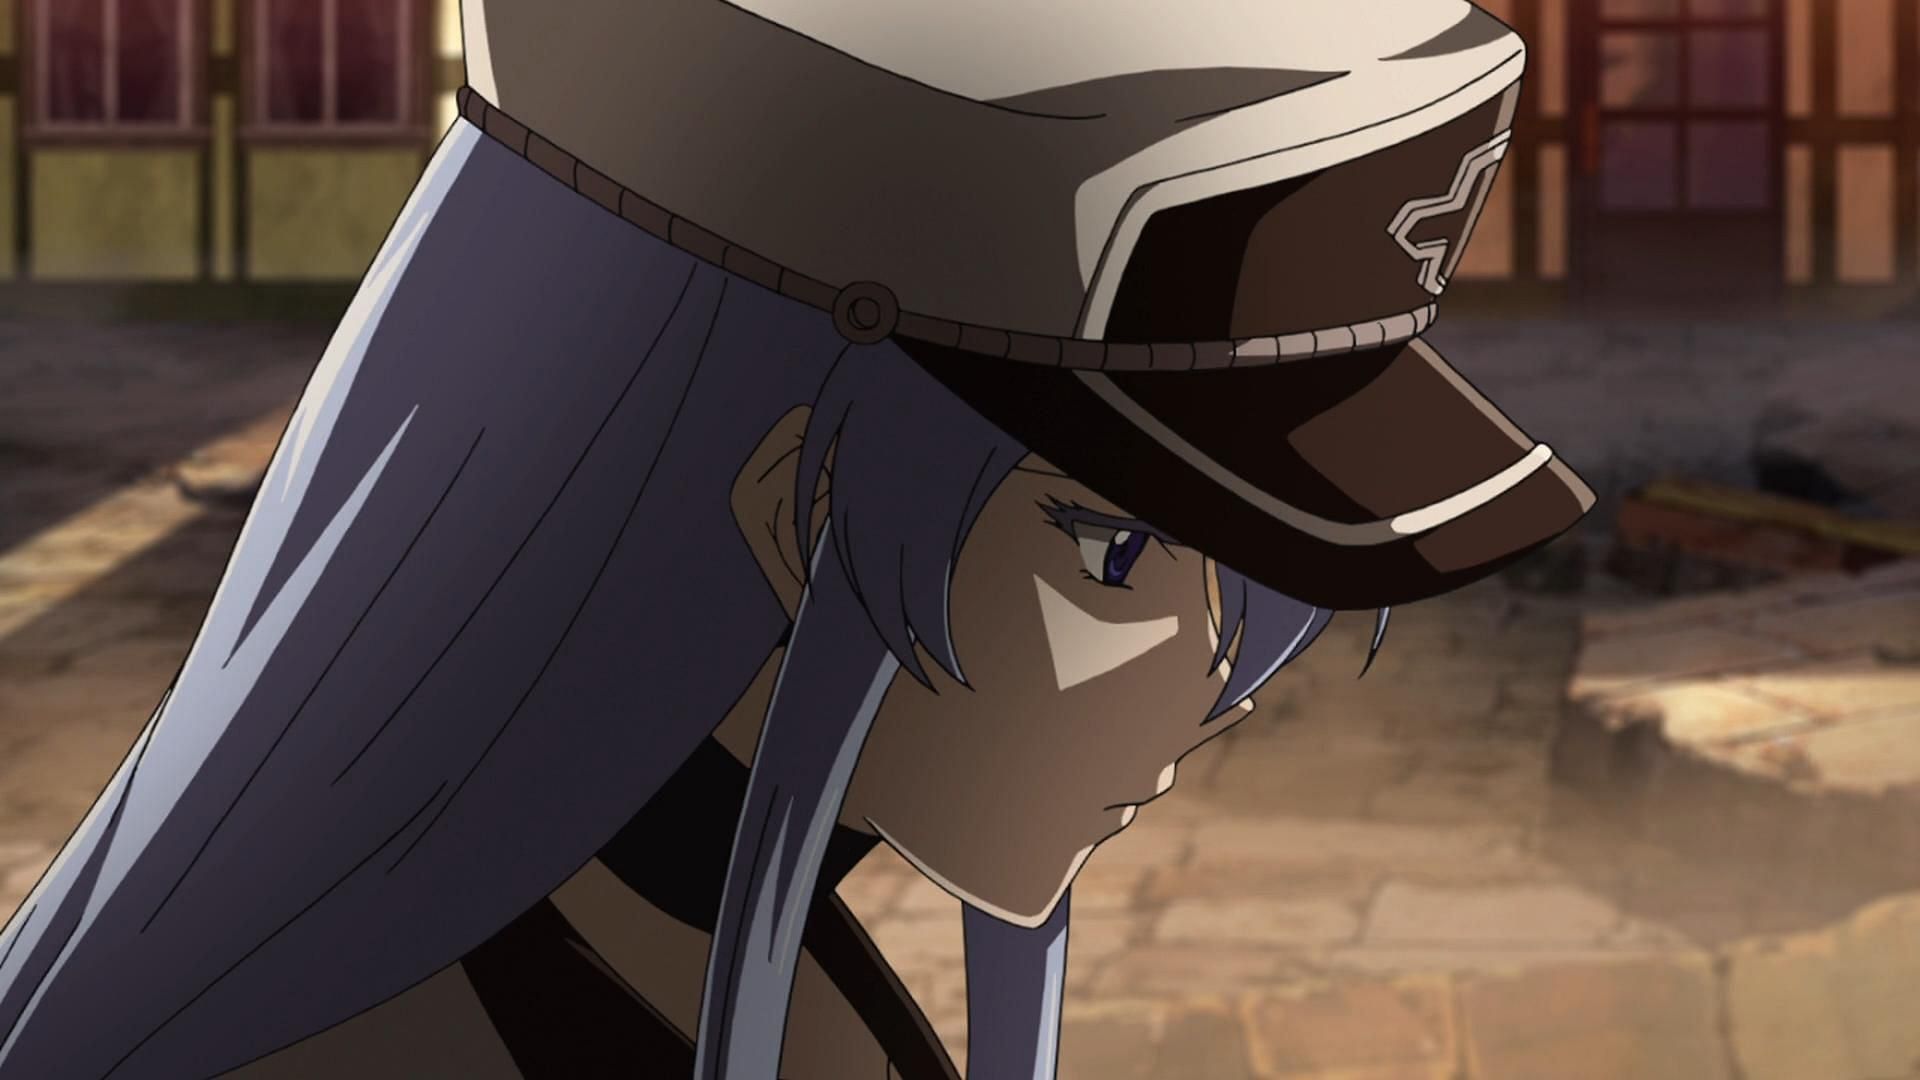 Esdeath as seen in the anime (Image via Square Enix)